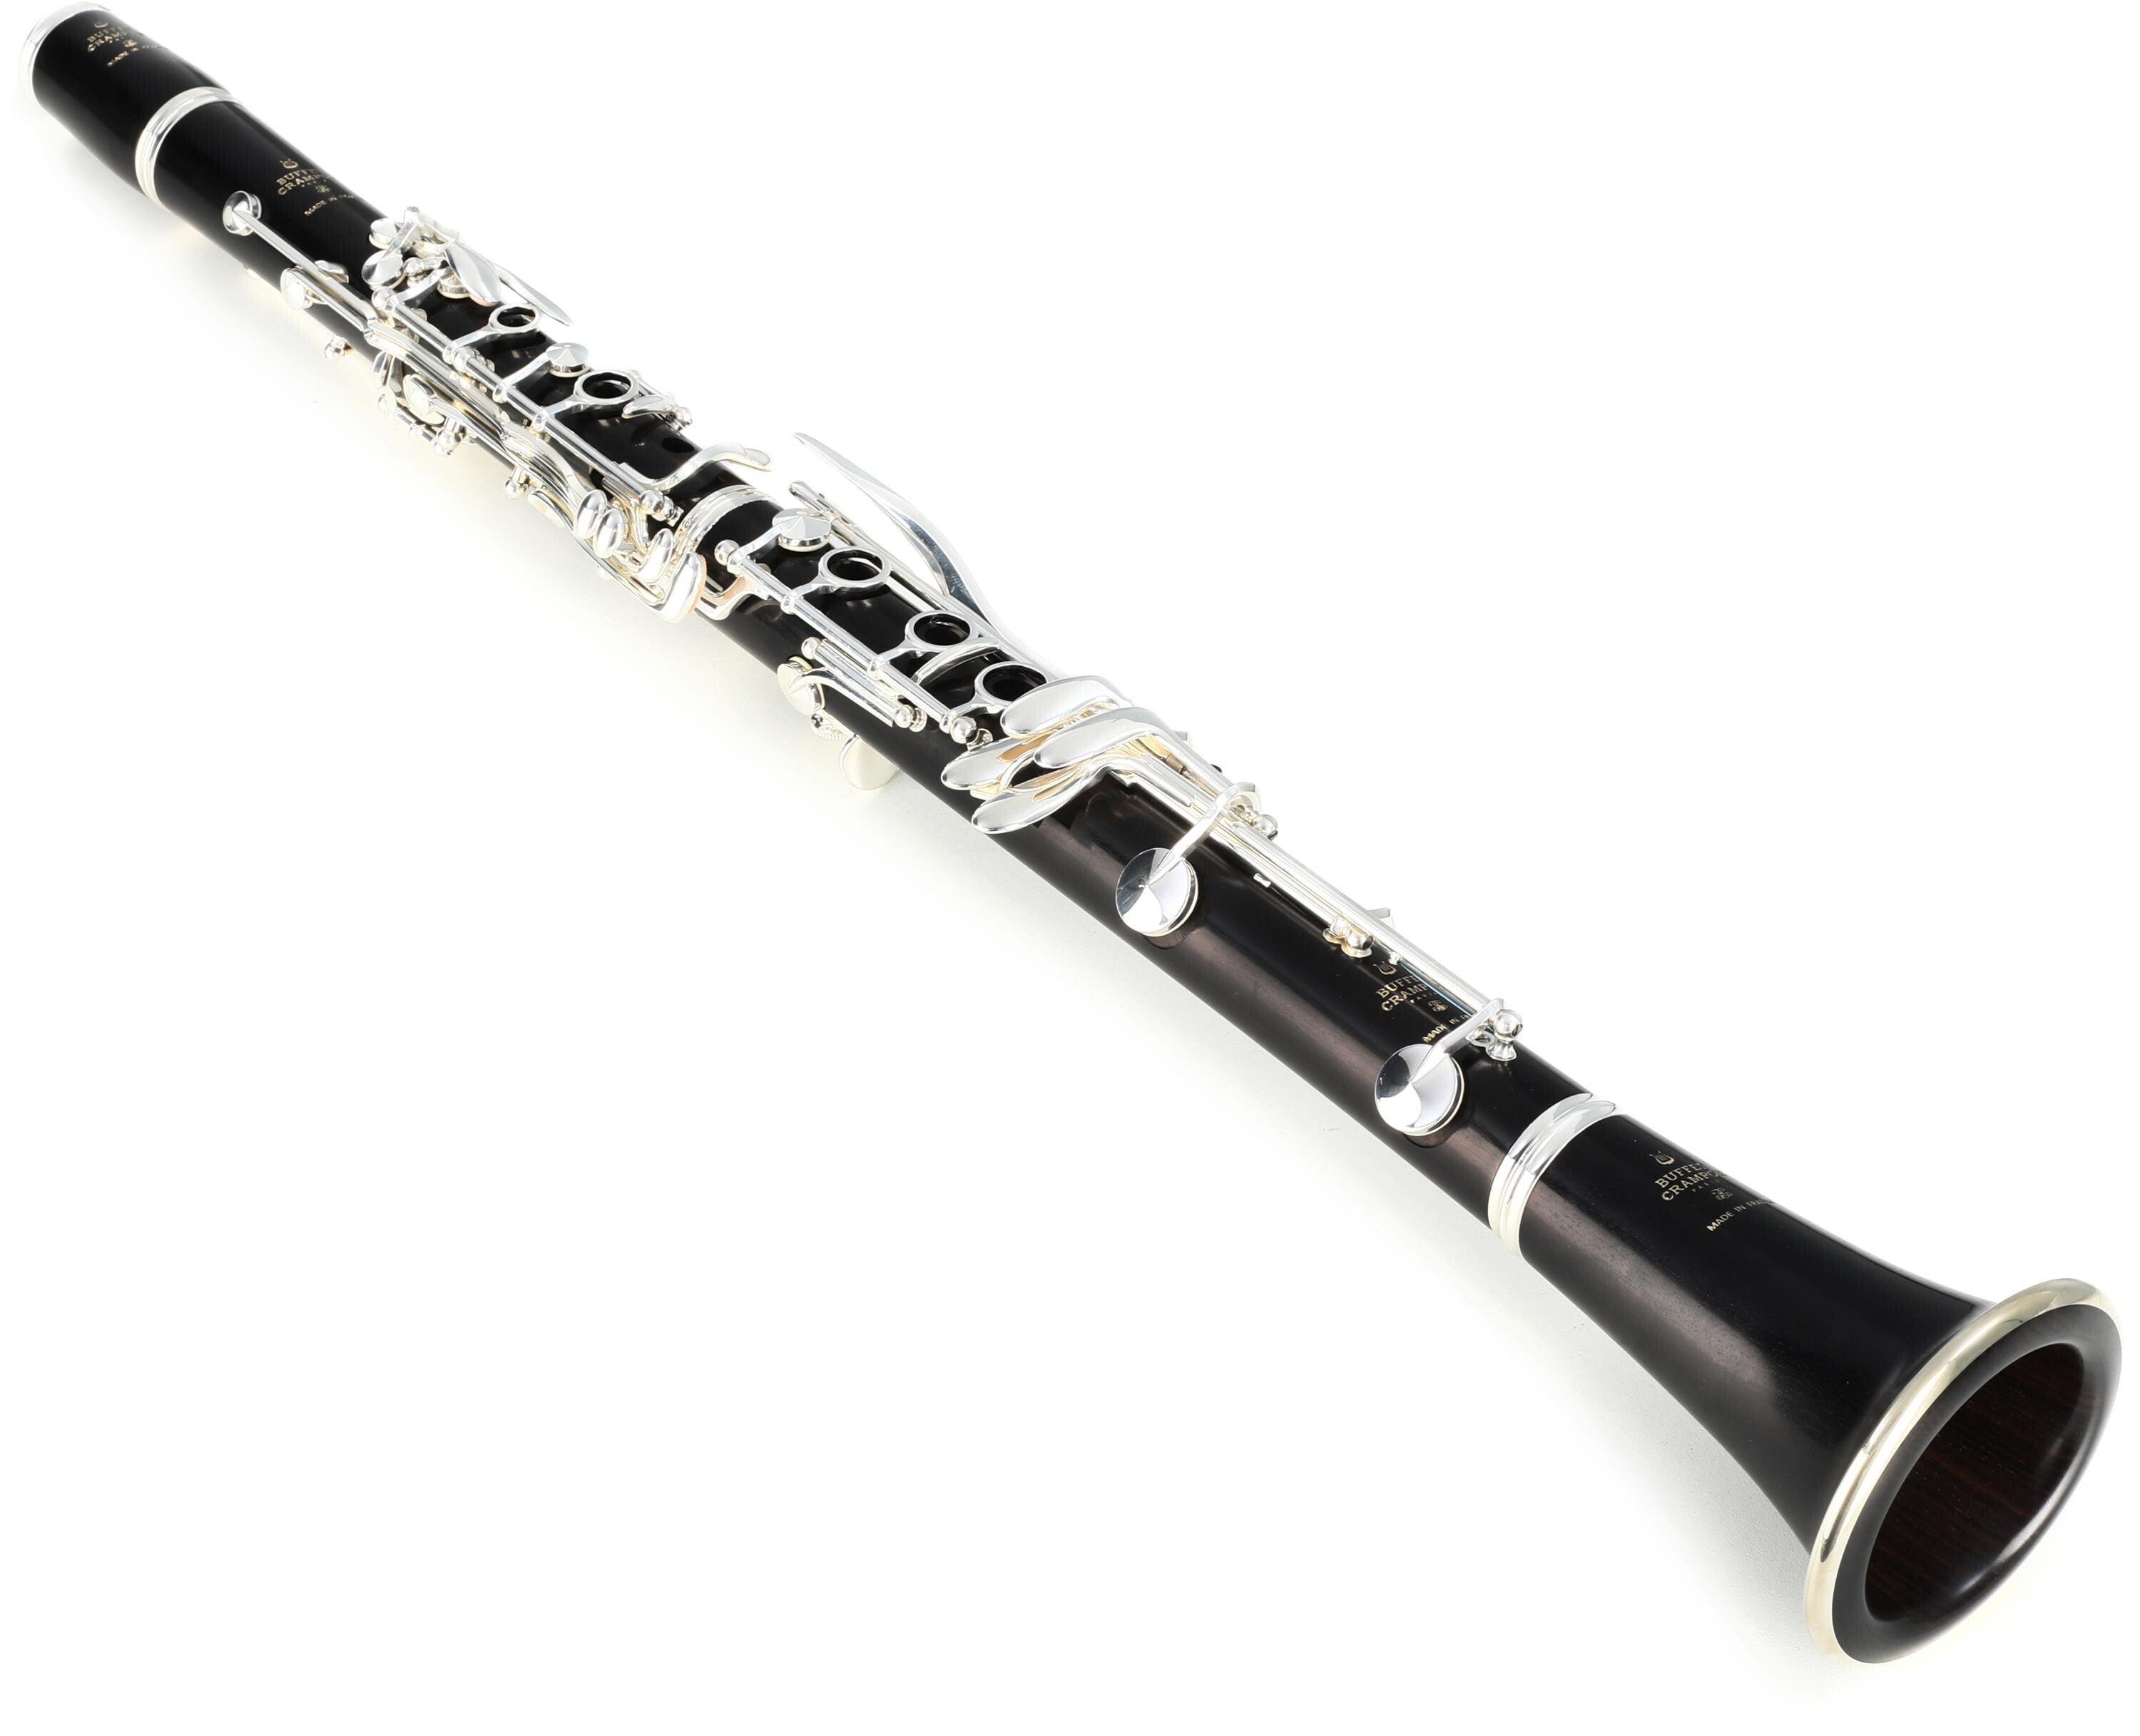 Buffet Crampon R13 Professional A Clarinet with Silver-plated Keys 